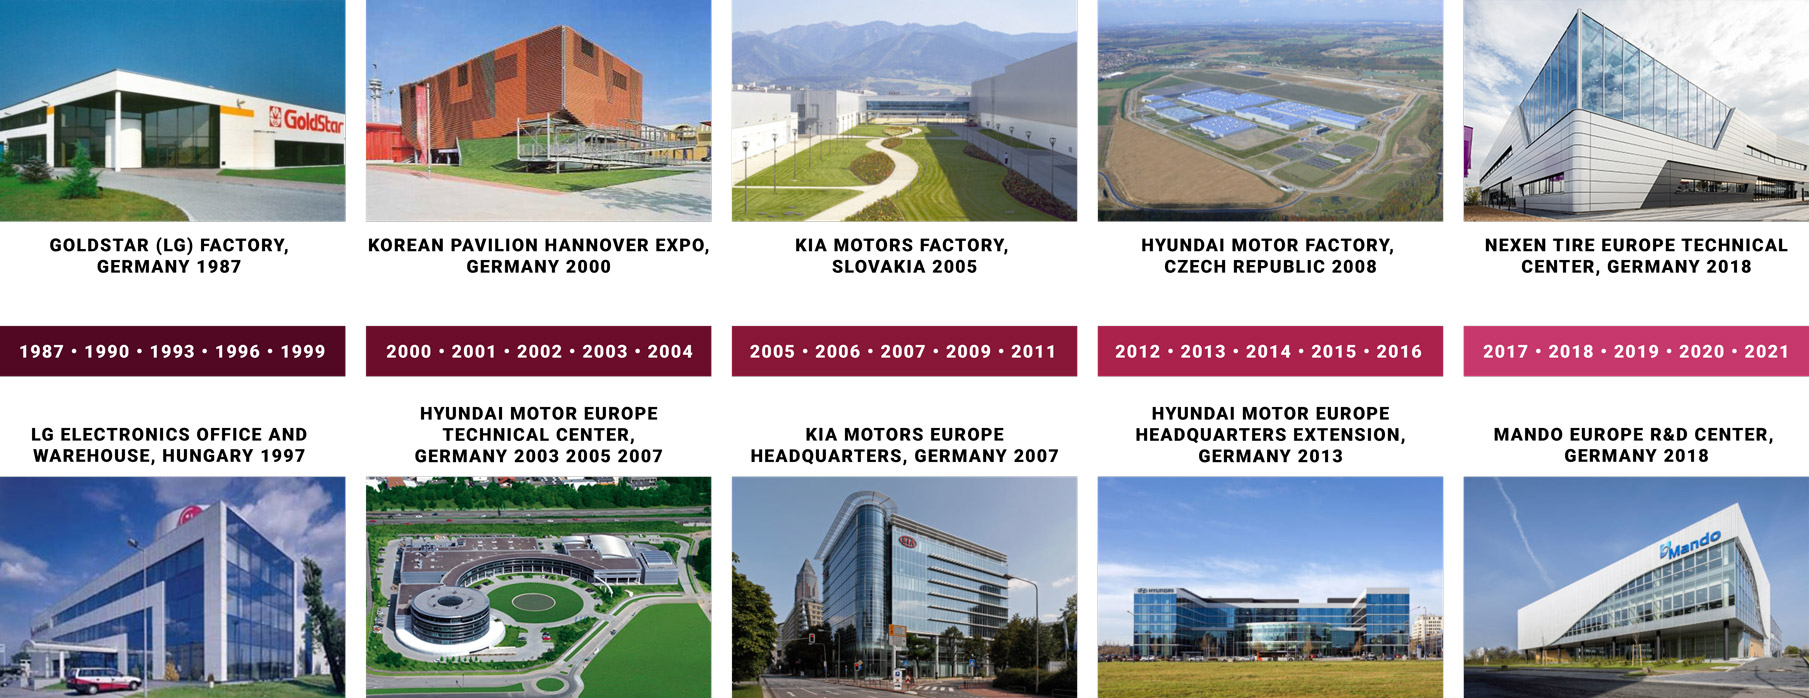 Timeline with photos of various industrial buildings by Takenaka in Europe, realized between 1987 and 2018.